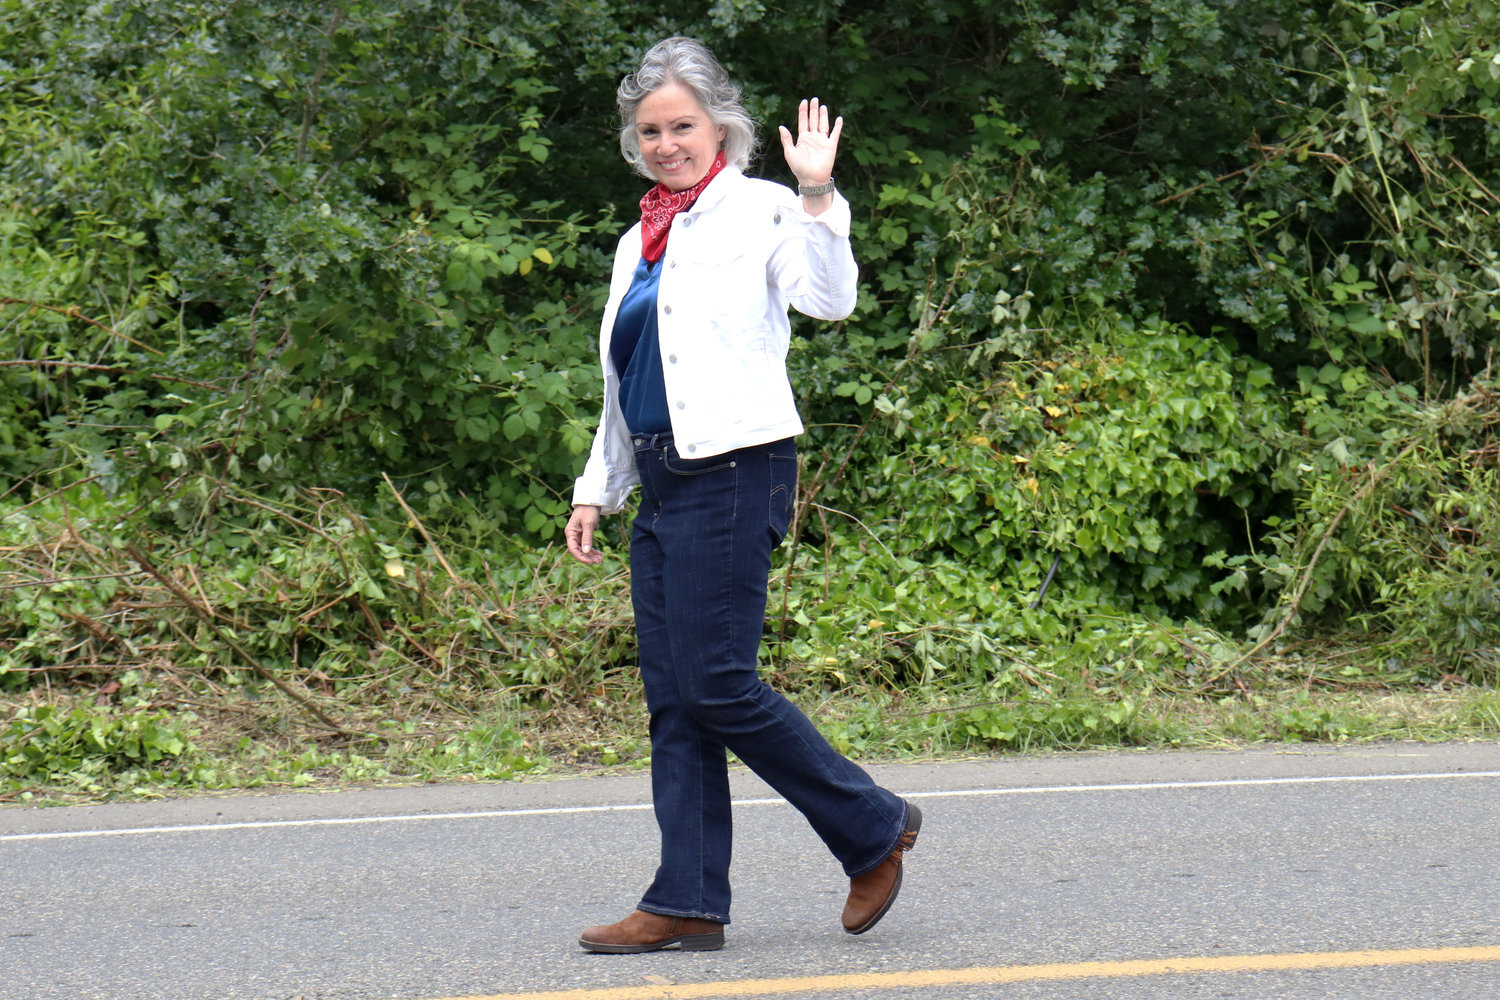 Rep. Sandy Kaiser, D-Olympia, of the 35th District, waves during the Swede Day Parade in Rochester on Saturday.